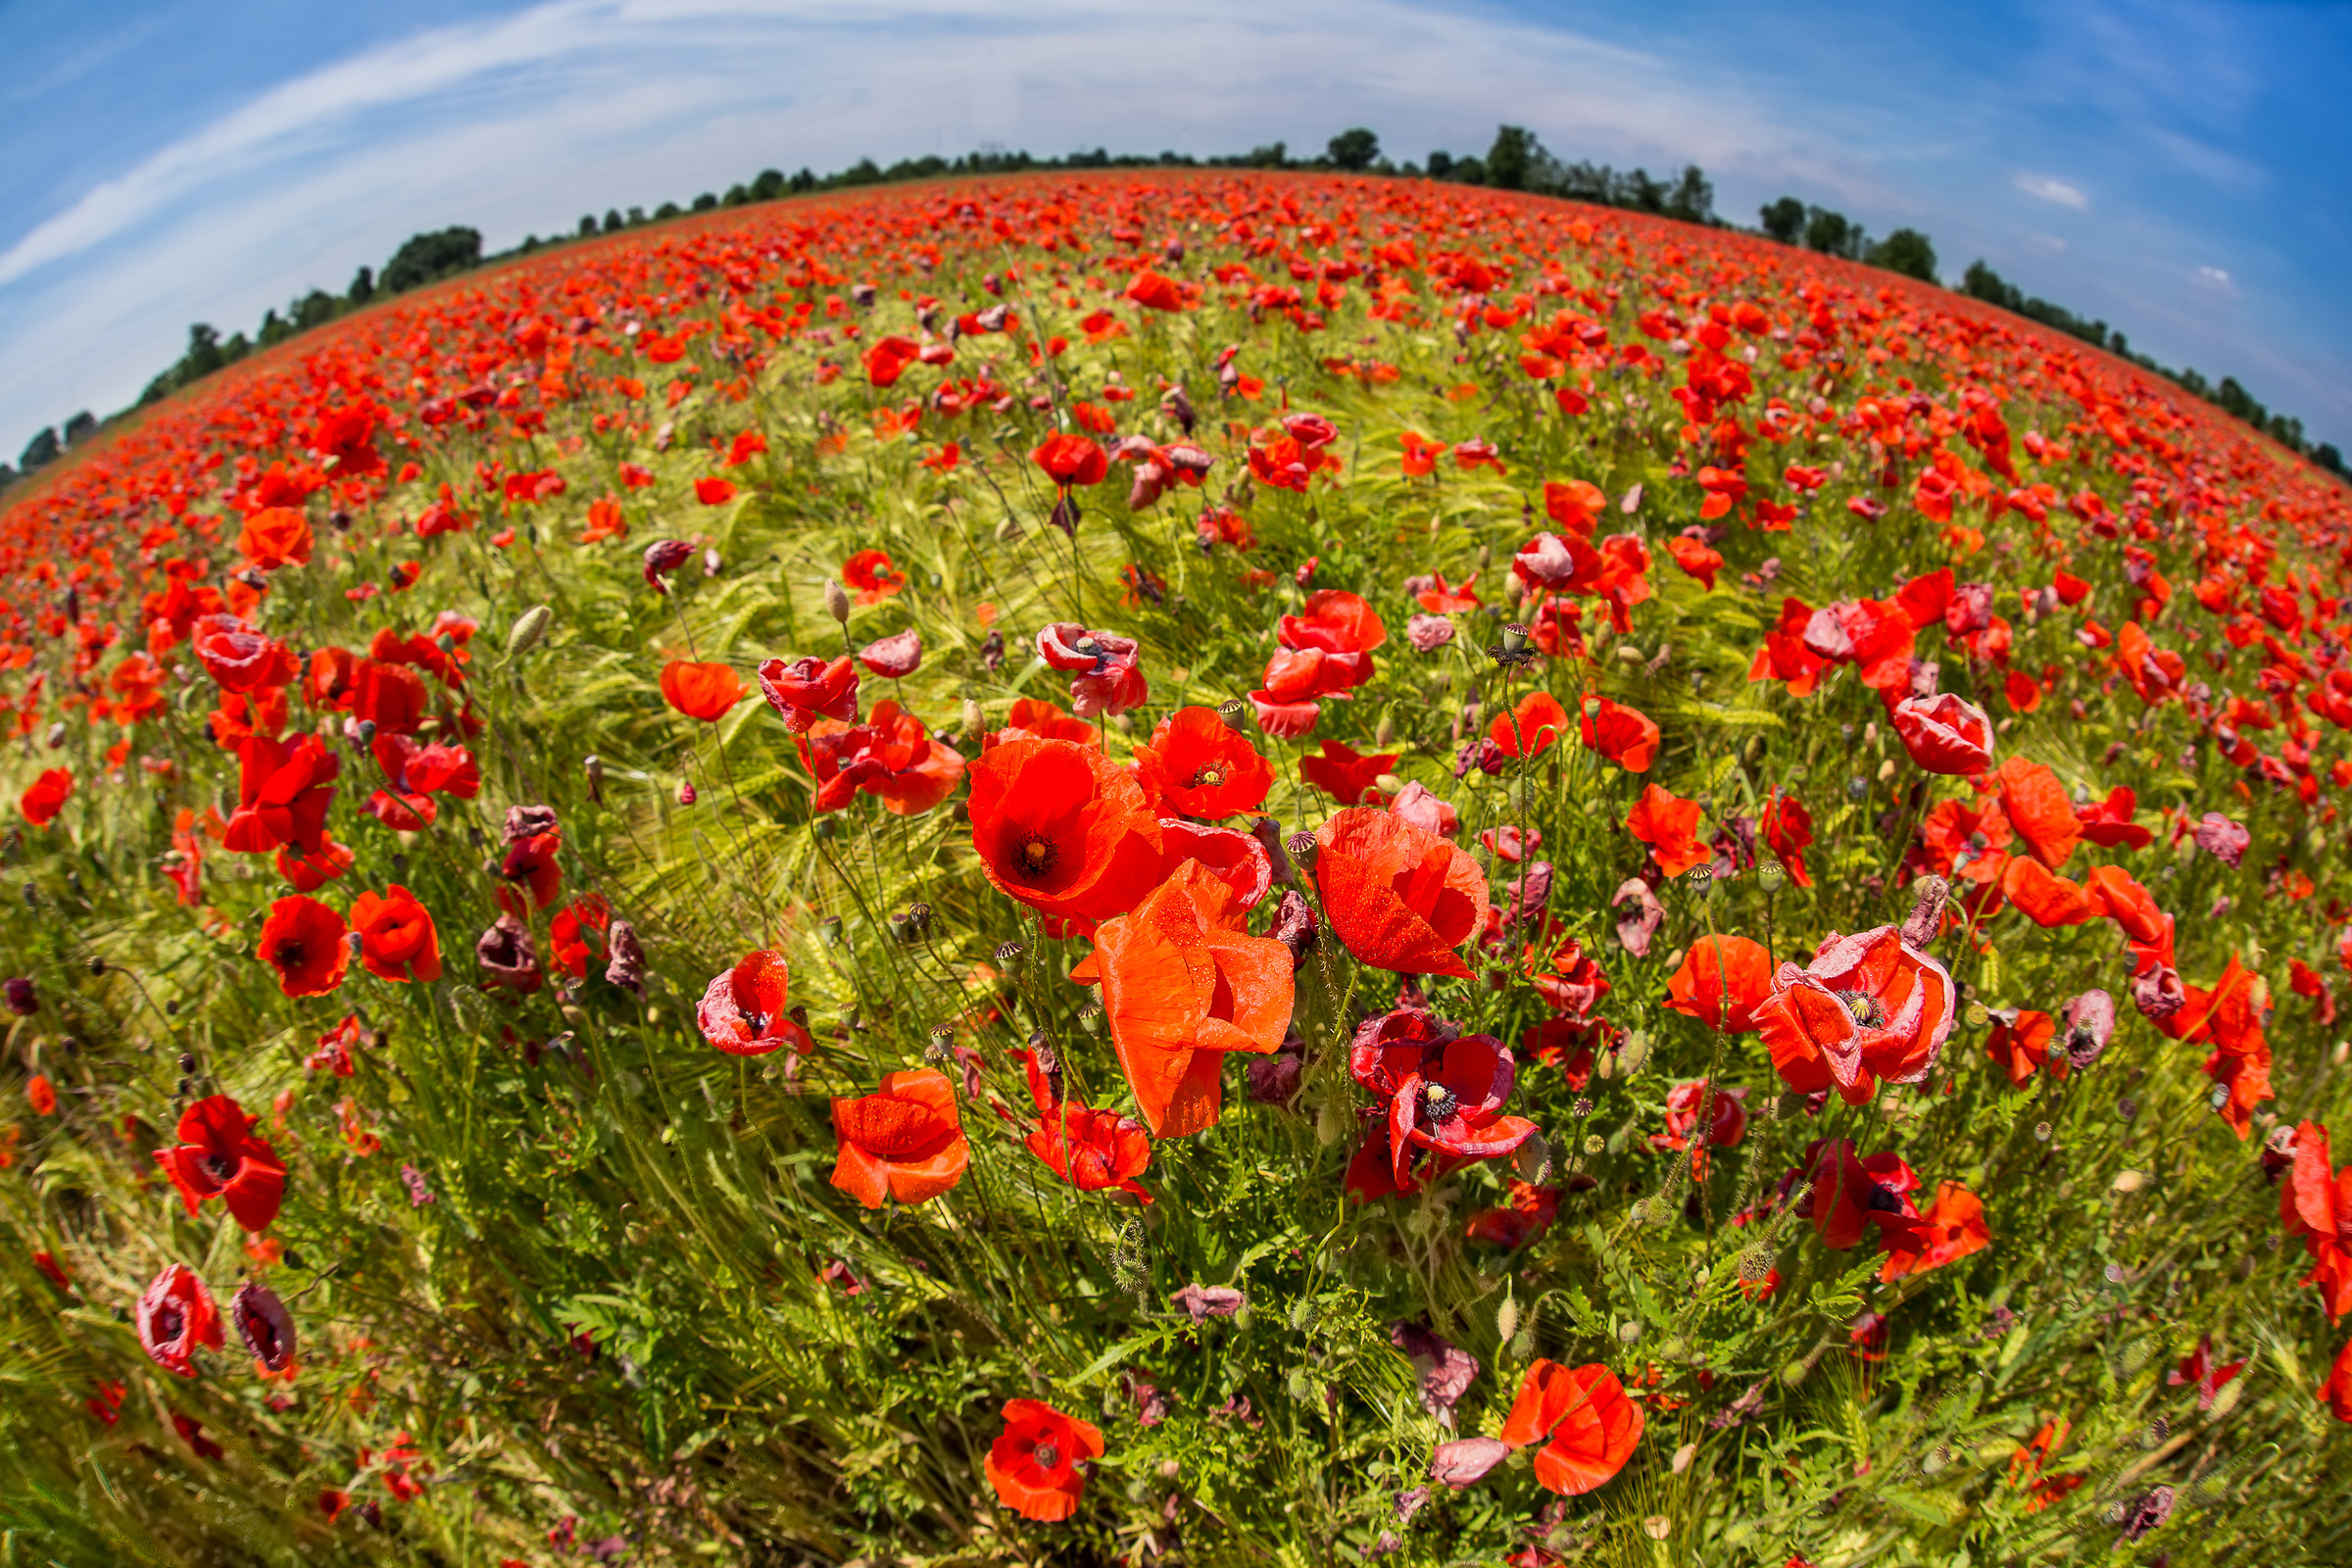 The planet poppies...